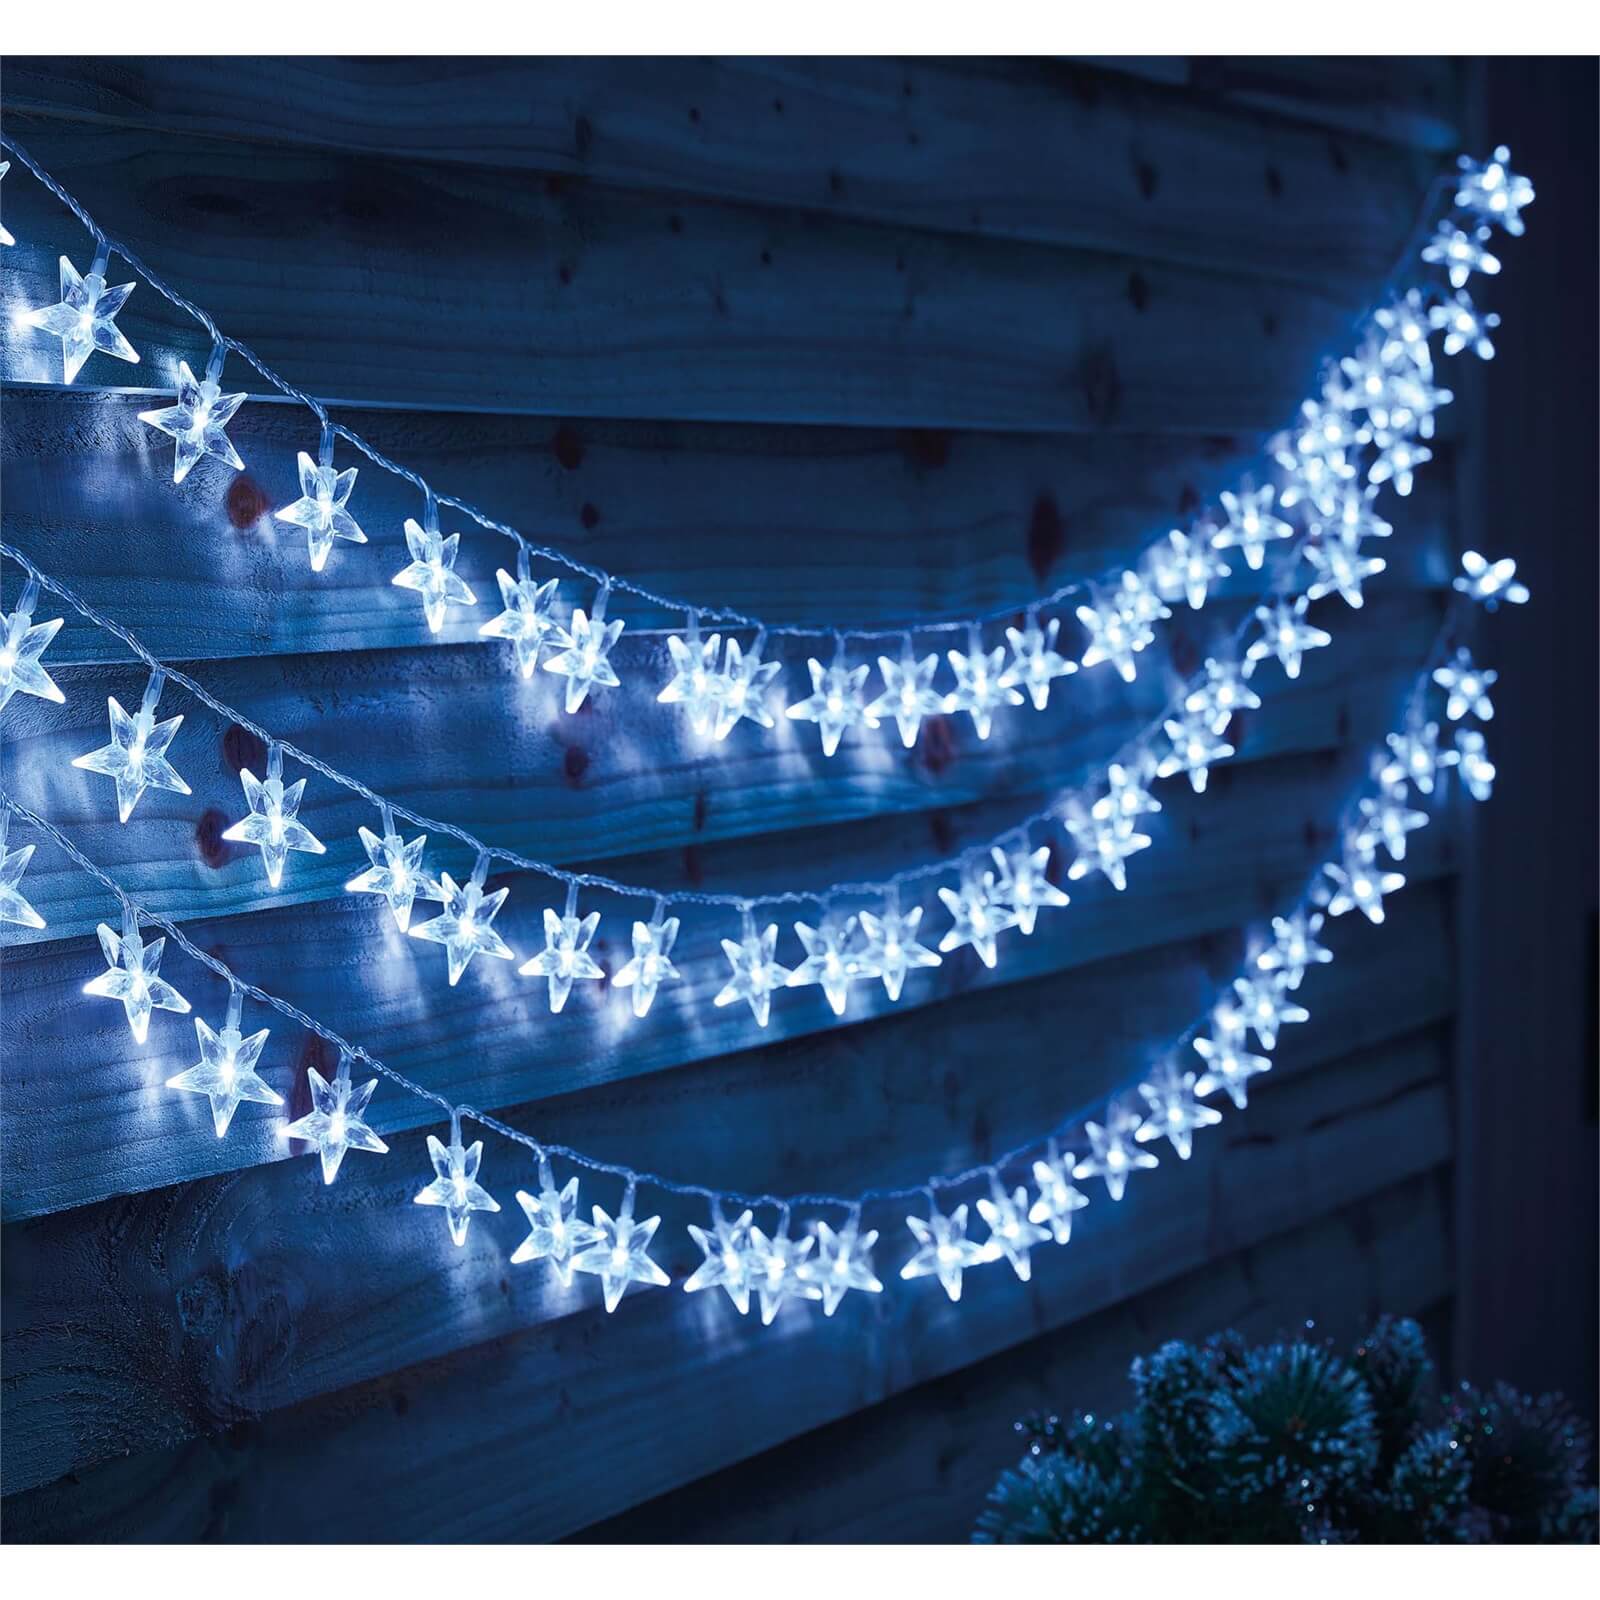 100 Star Party Lights - Bright White